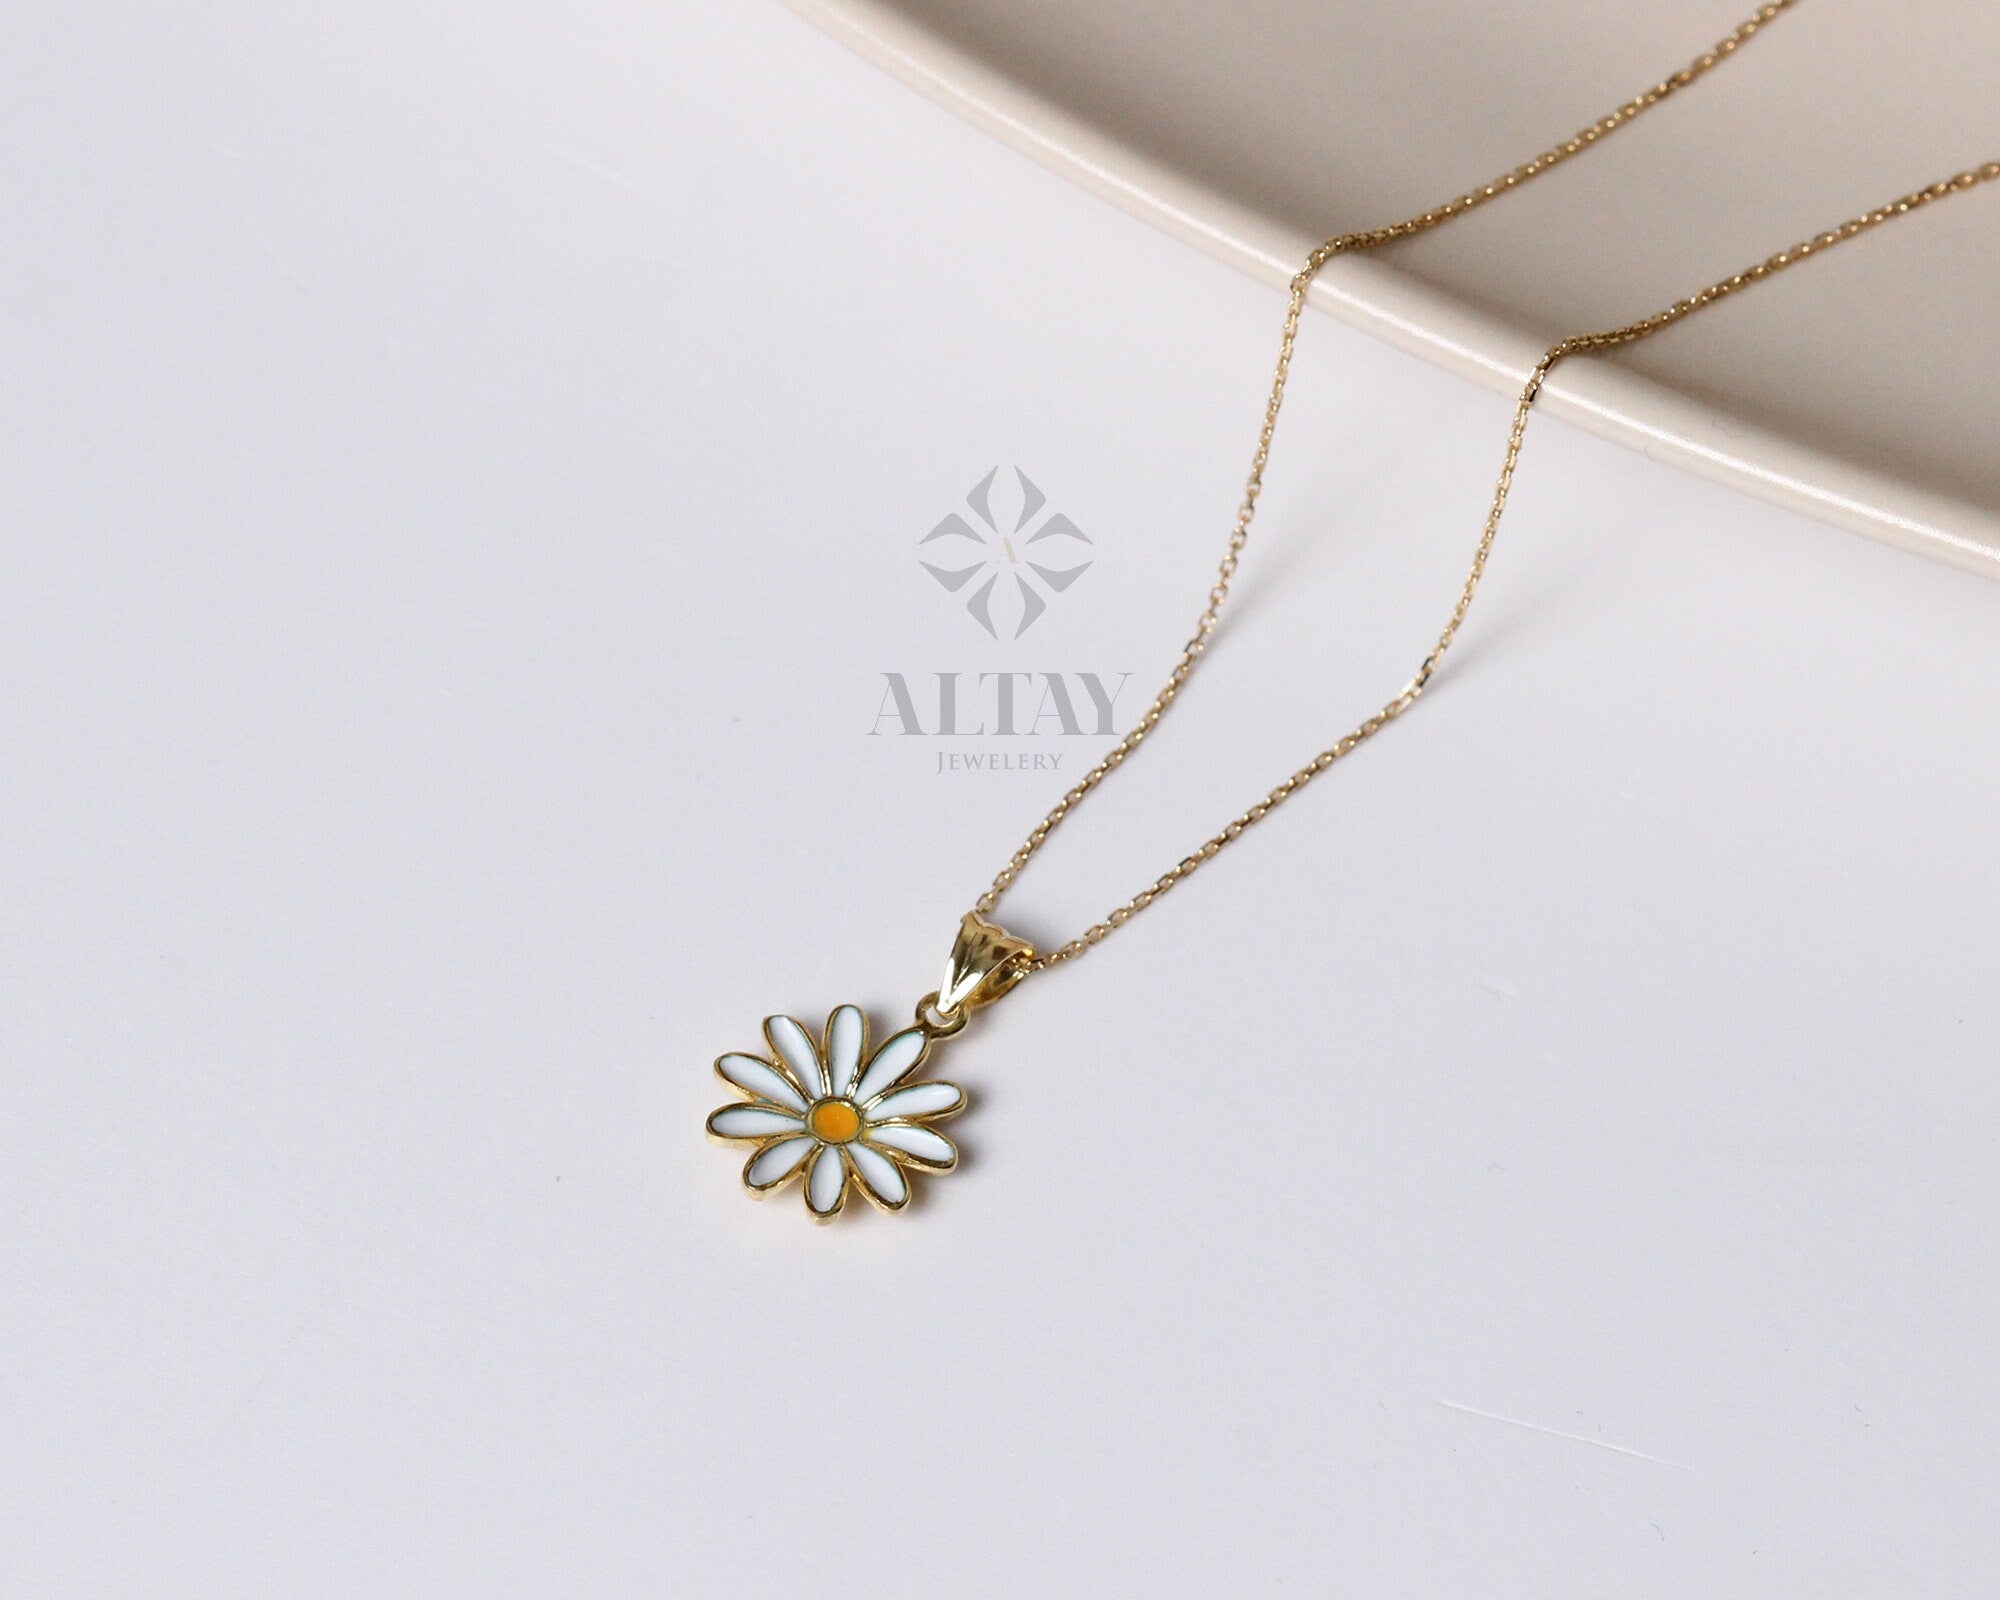 14K Gold Daisy Necklace, Gold Flower Pendant, Yellow and White Enamel Choker, Gift for Her, Daisy Charm, Dainty Everyday Daisy Jewelry